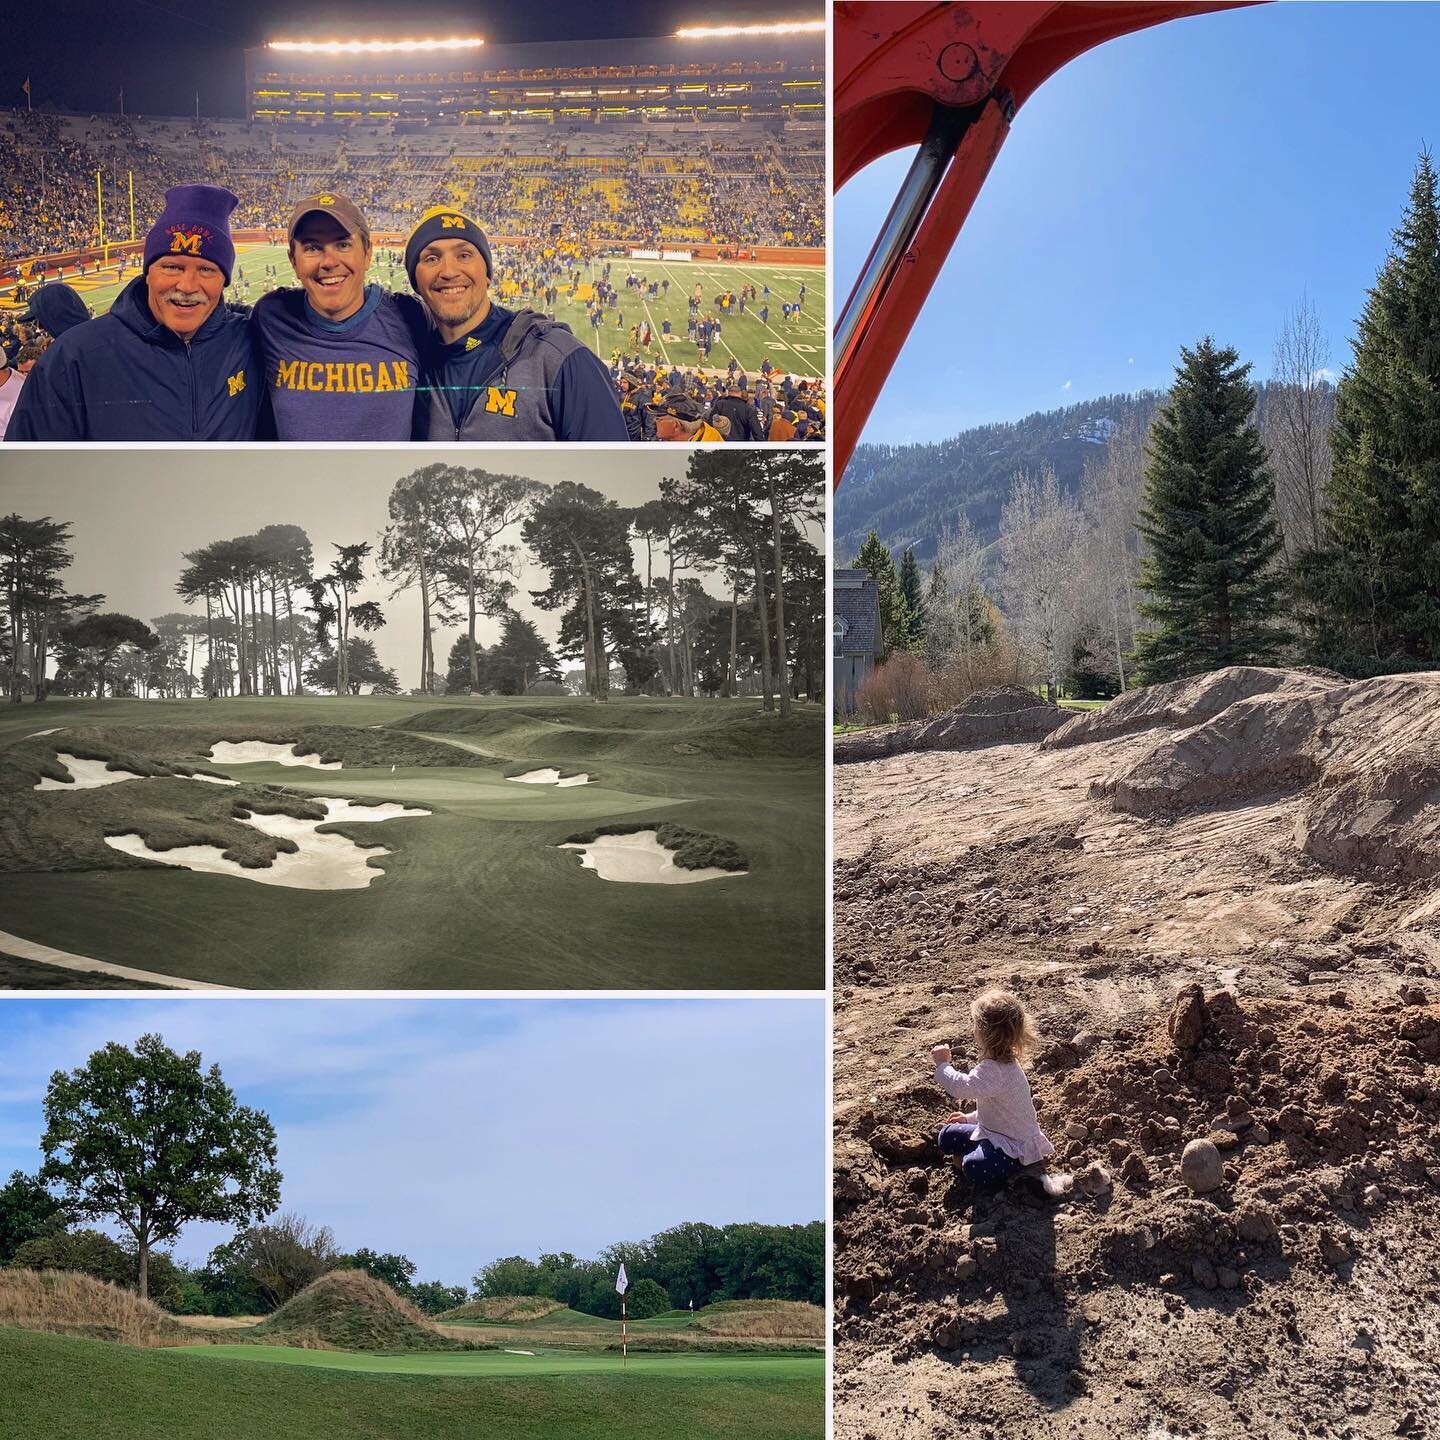 Some highlights of 2022 while looking forward to 2023 and what should be our best year yet&mdash;Catching a rivalry game at @michiganstadium with my dad and brother, working on a dream restoration for Gil Hanse at @lakemercedgolfclub, seeing a bunch 